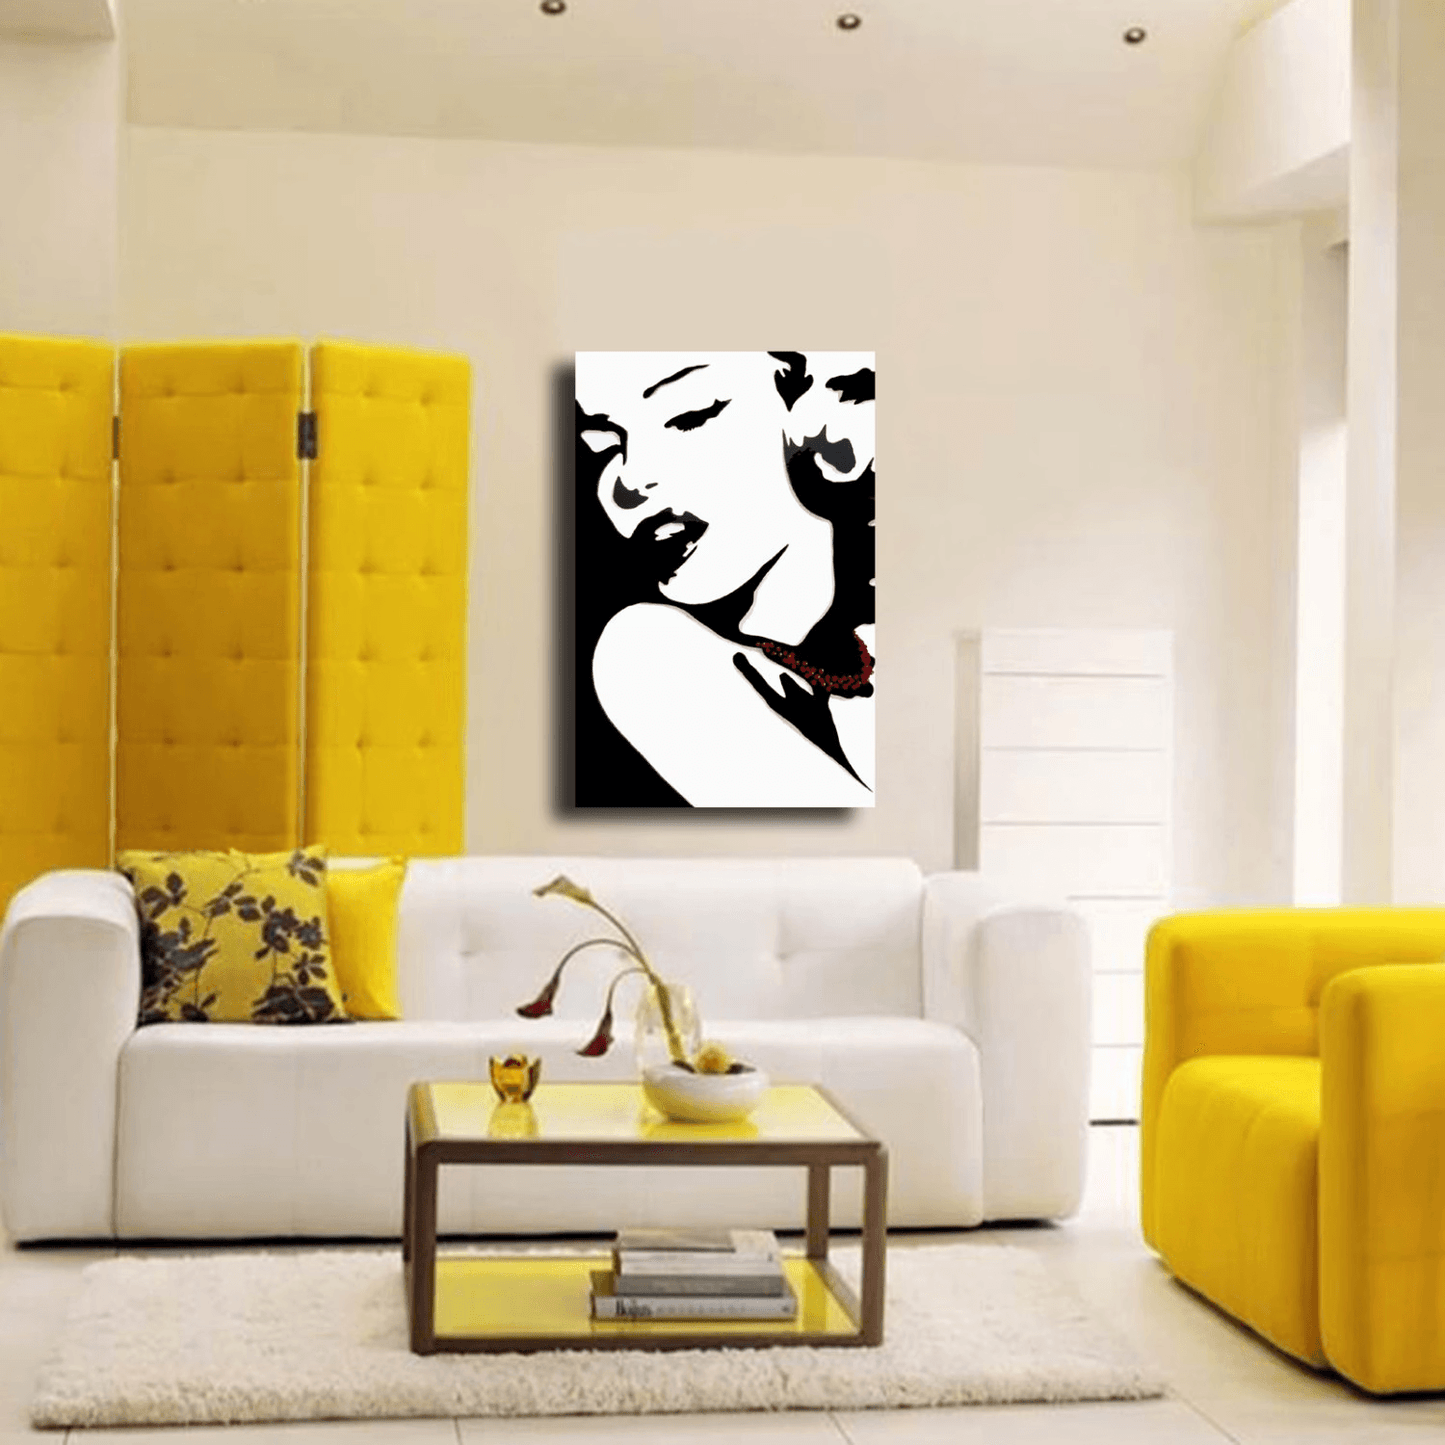 Abstract painting Modern pop Art Contemporary black white movie Portrait - Marilyn - Thomasfedro